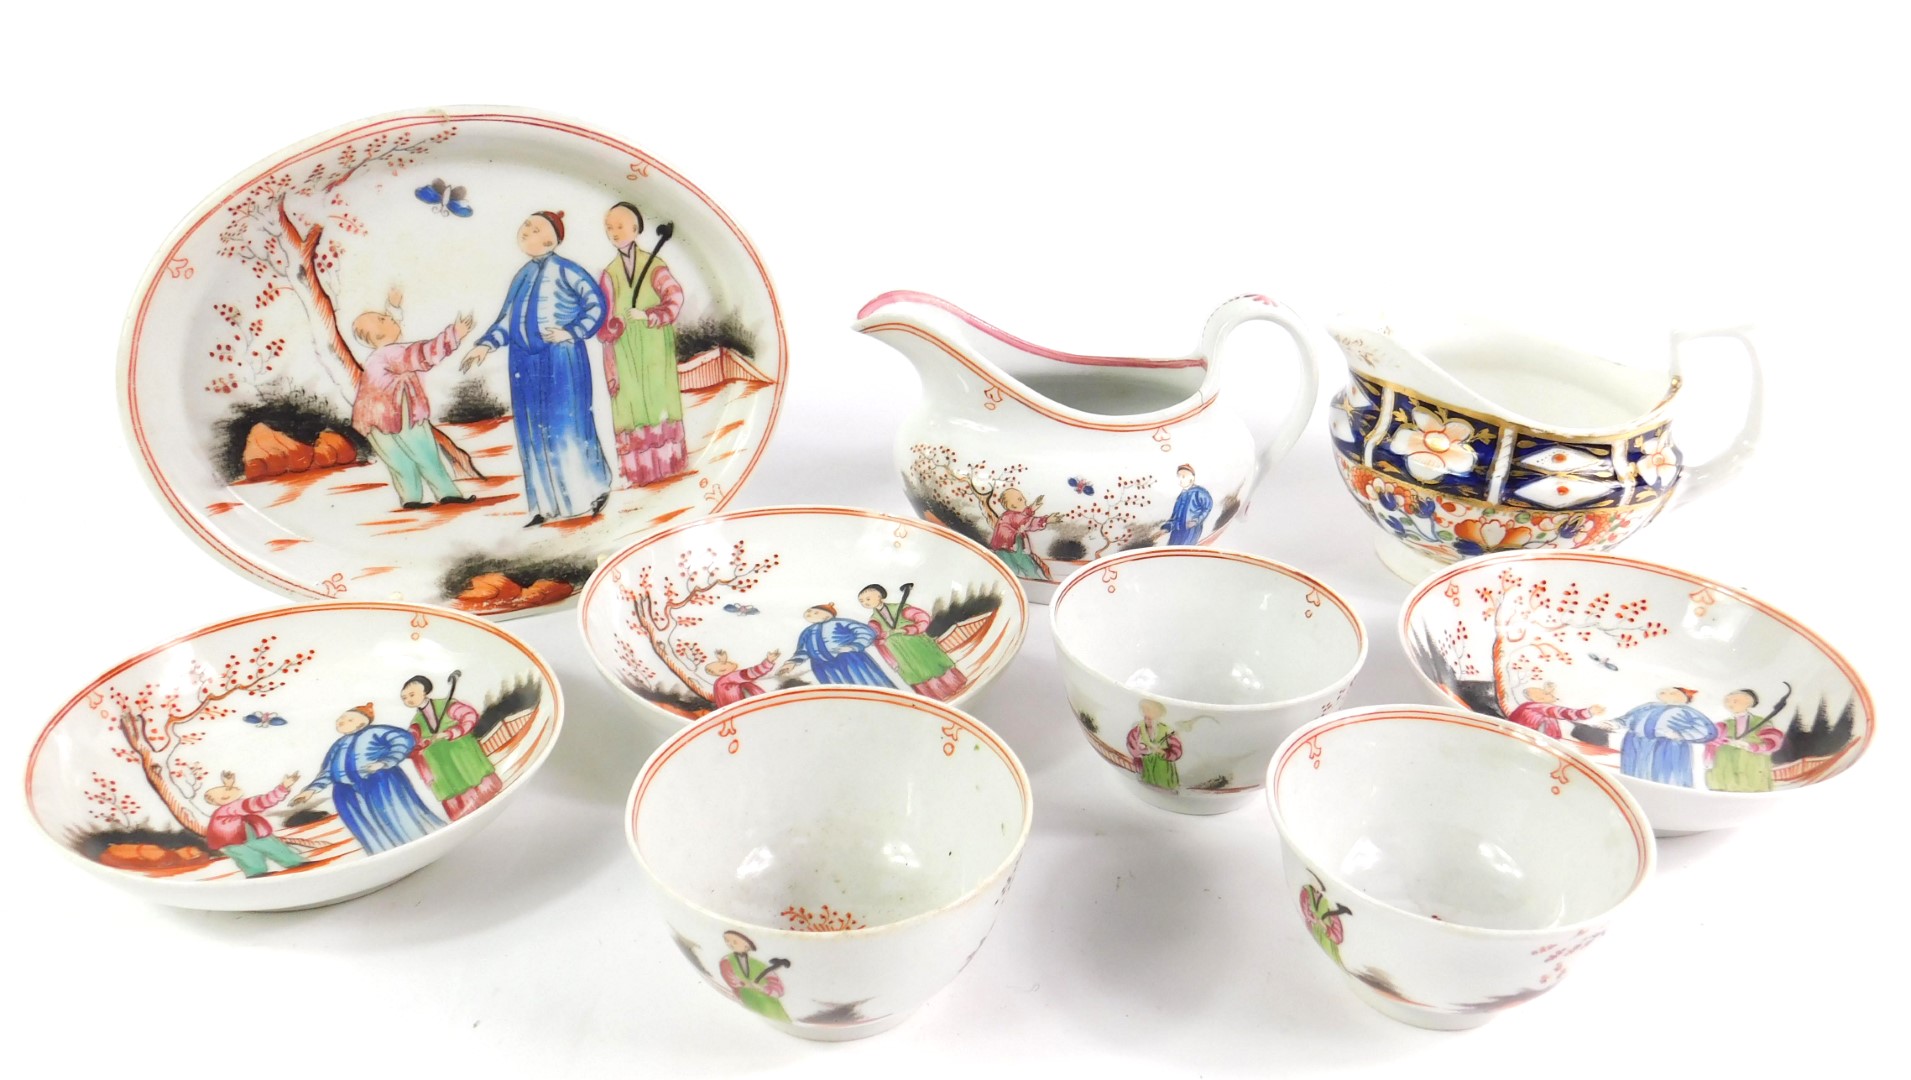 A Newhall porcelain late 18thC part tea service, decorated with chinoiserie figures in a garden,